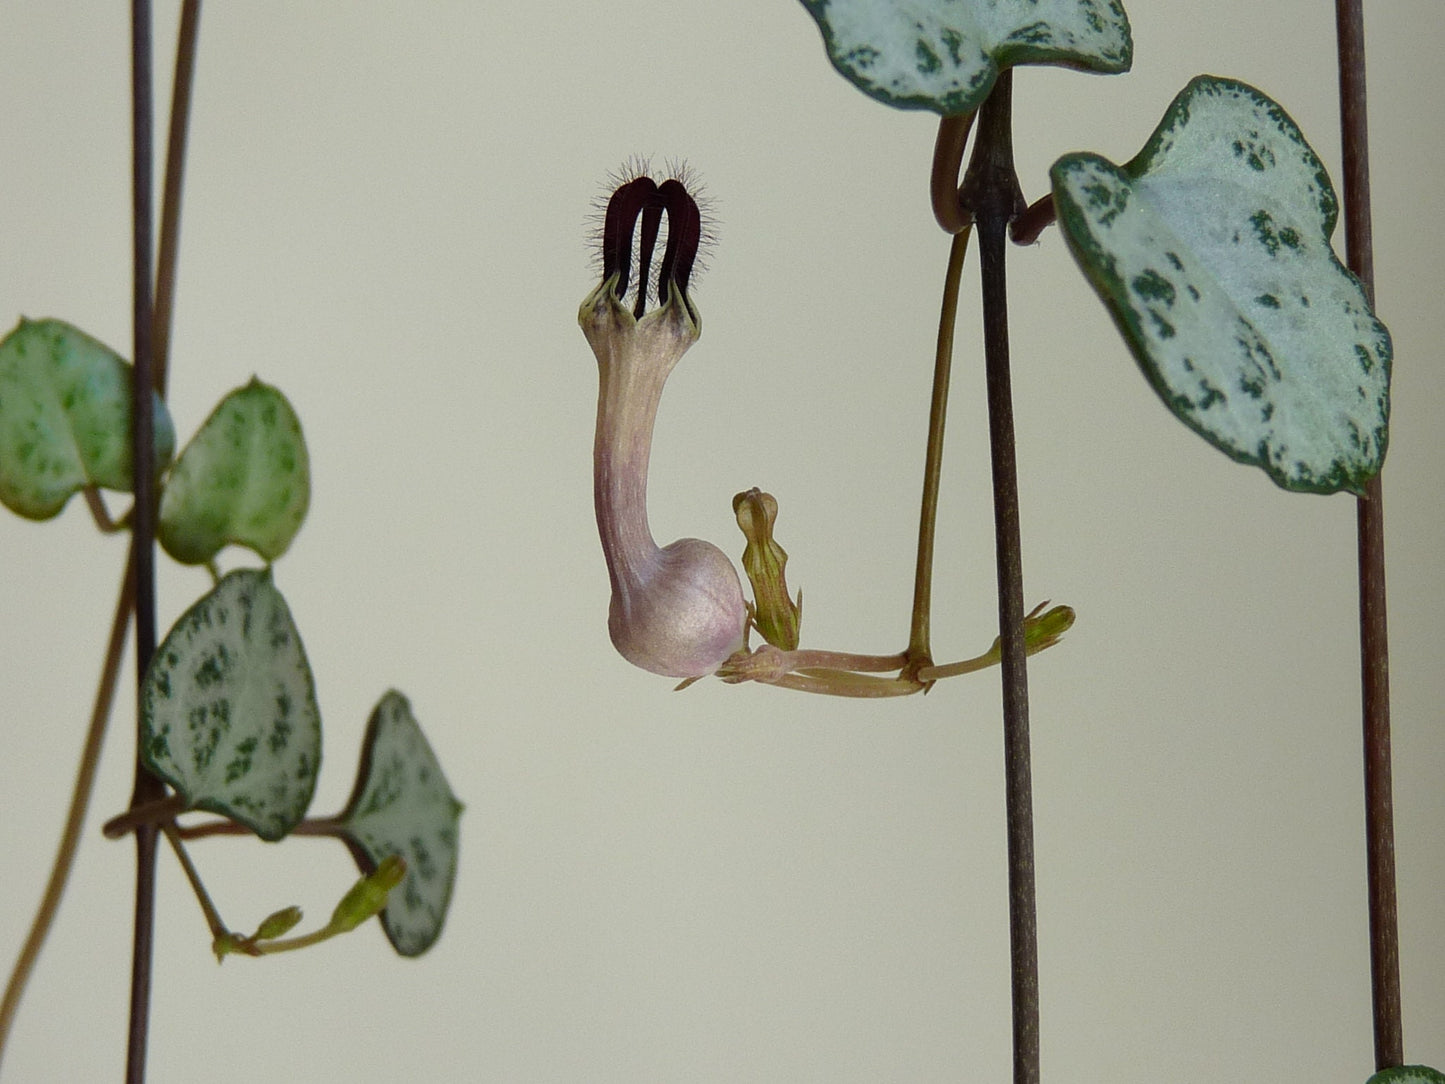 Ceropegia Woodii * String of Hearts * Flowering Plant * Very Rare * 3 Seeds *